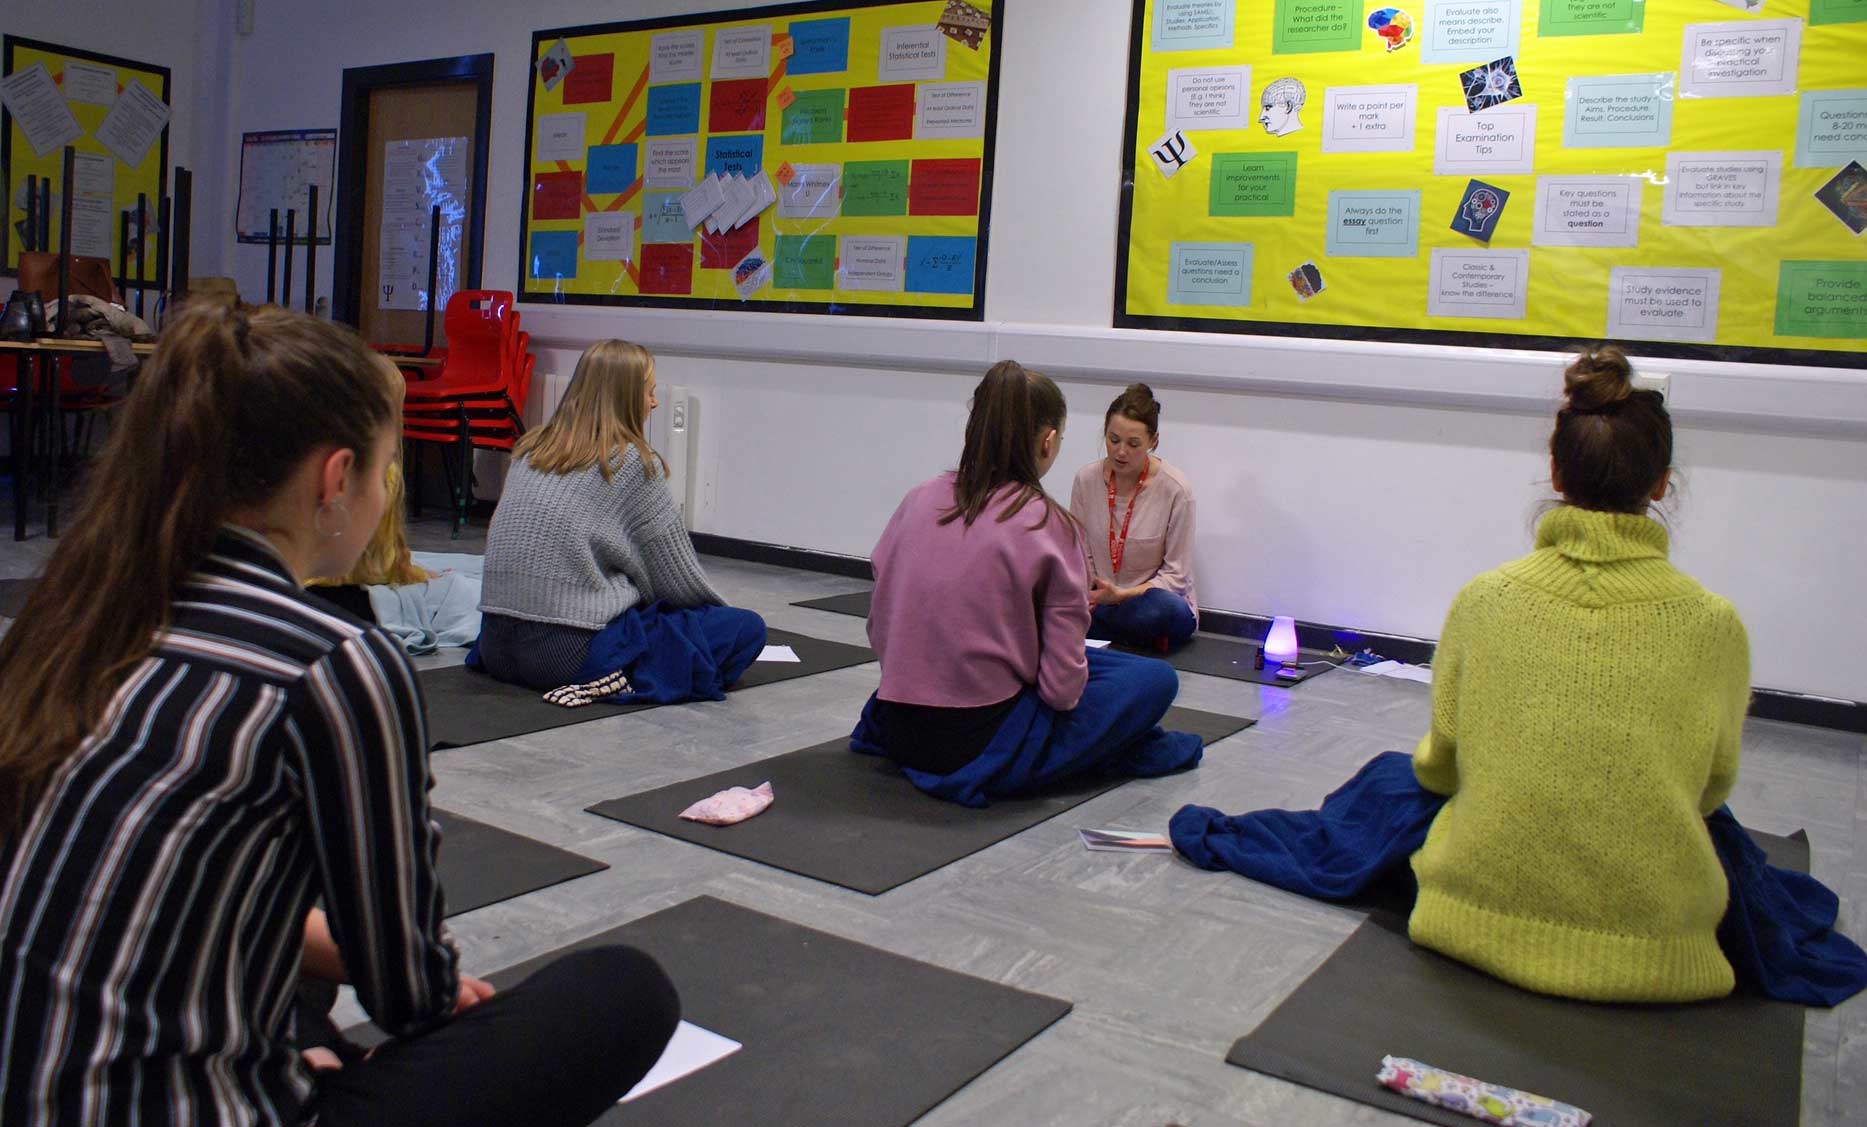 Rossett students take part in mindfulness sessions during Children’s Mental Health Week 2019